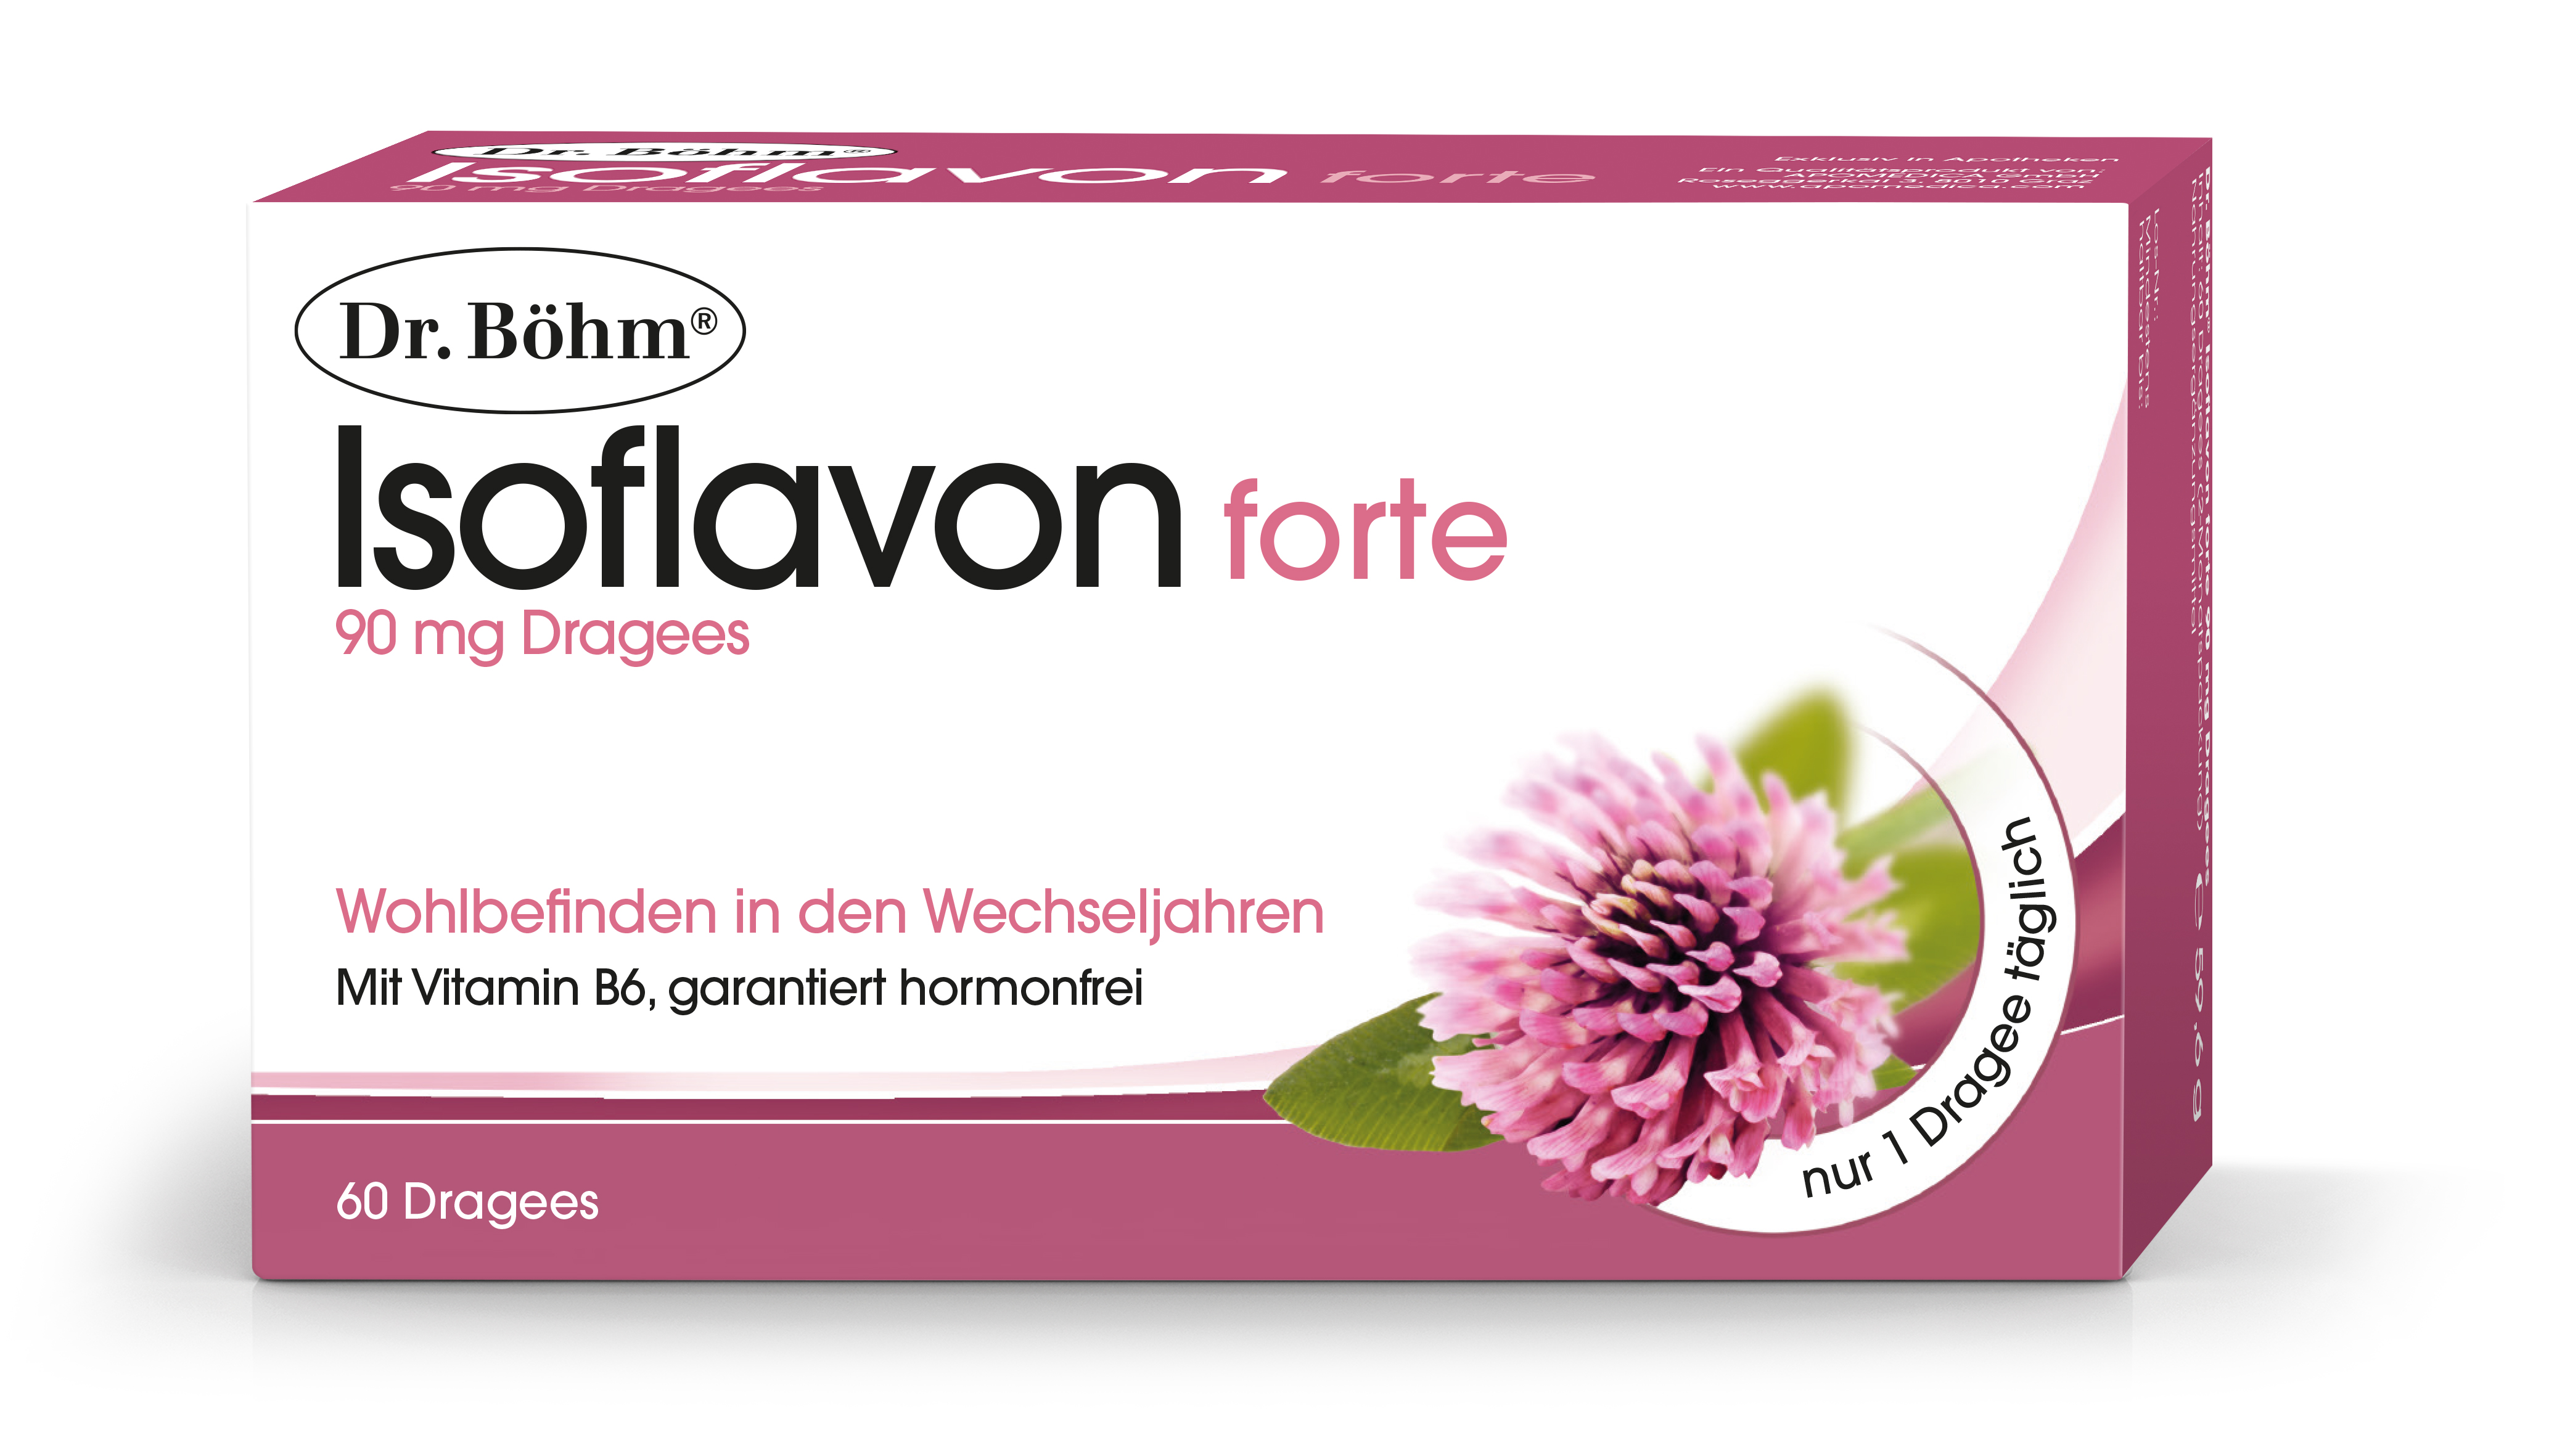 Dr. Böhm<sup>®</sup> Isoflavon forte 90 mg Dragees